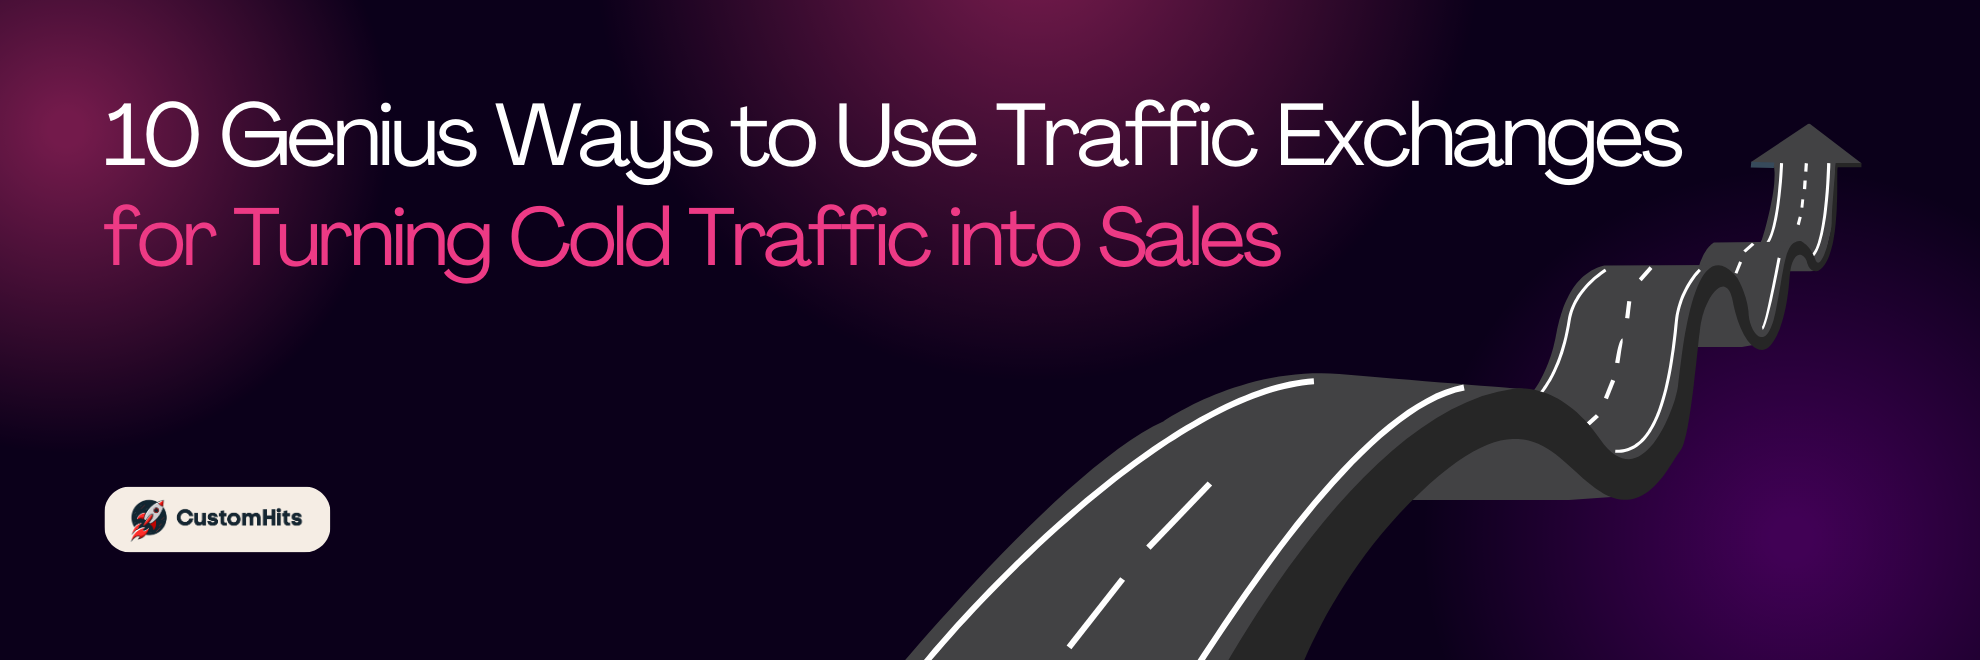 10 Genius Ways to Use Traffic Exchanges for Turning Cold Traffic into Sales